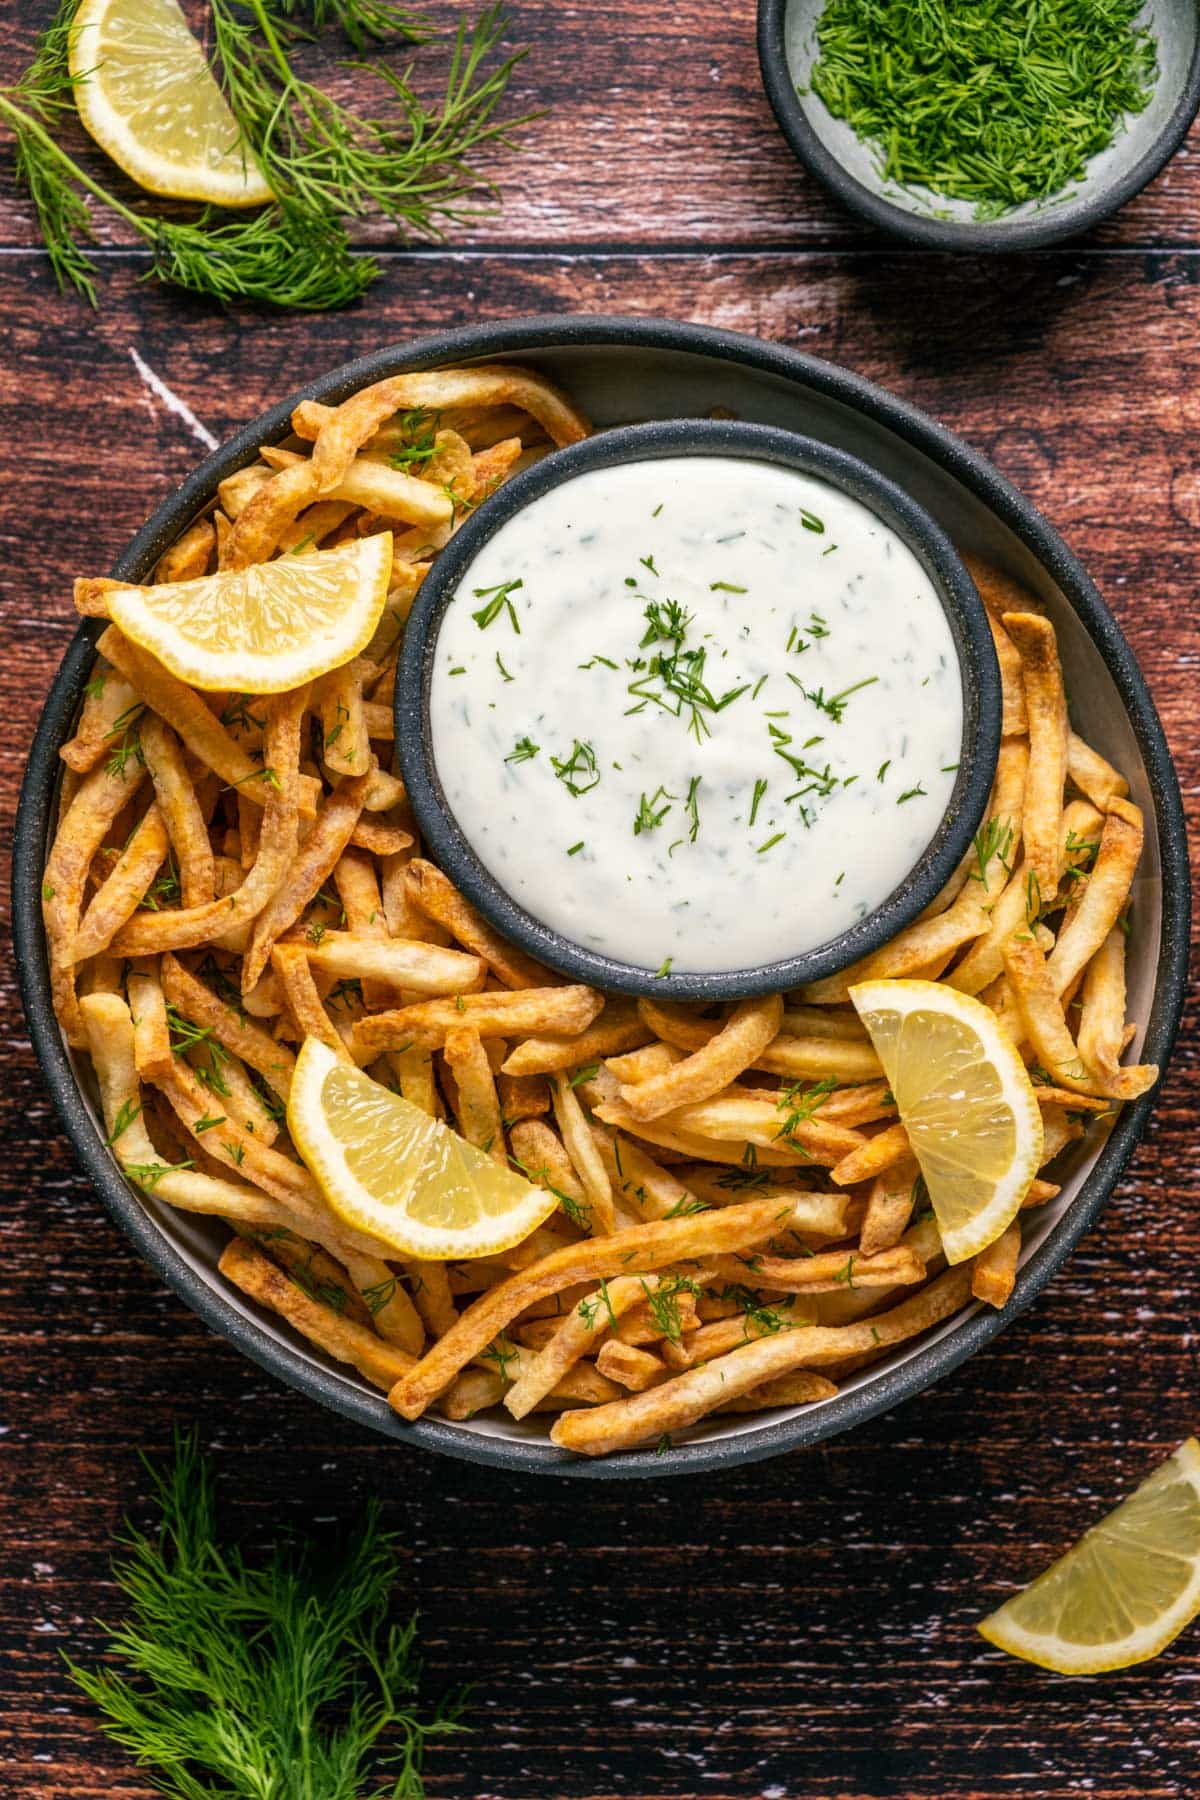 Lemon dill aioli topped with a sprinkle of dill on a plate with chips and lemon slices.